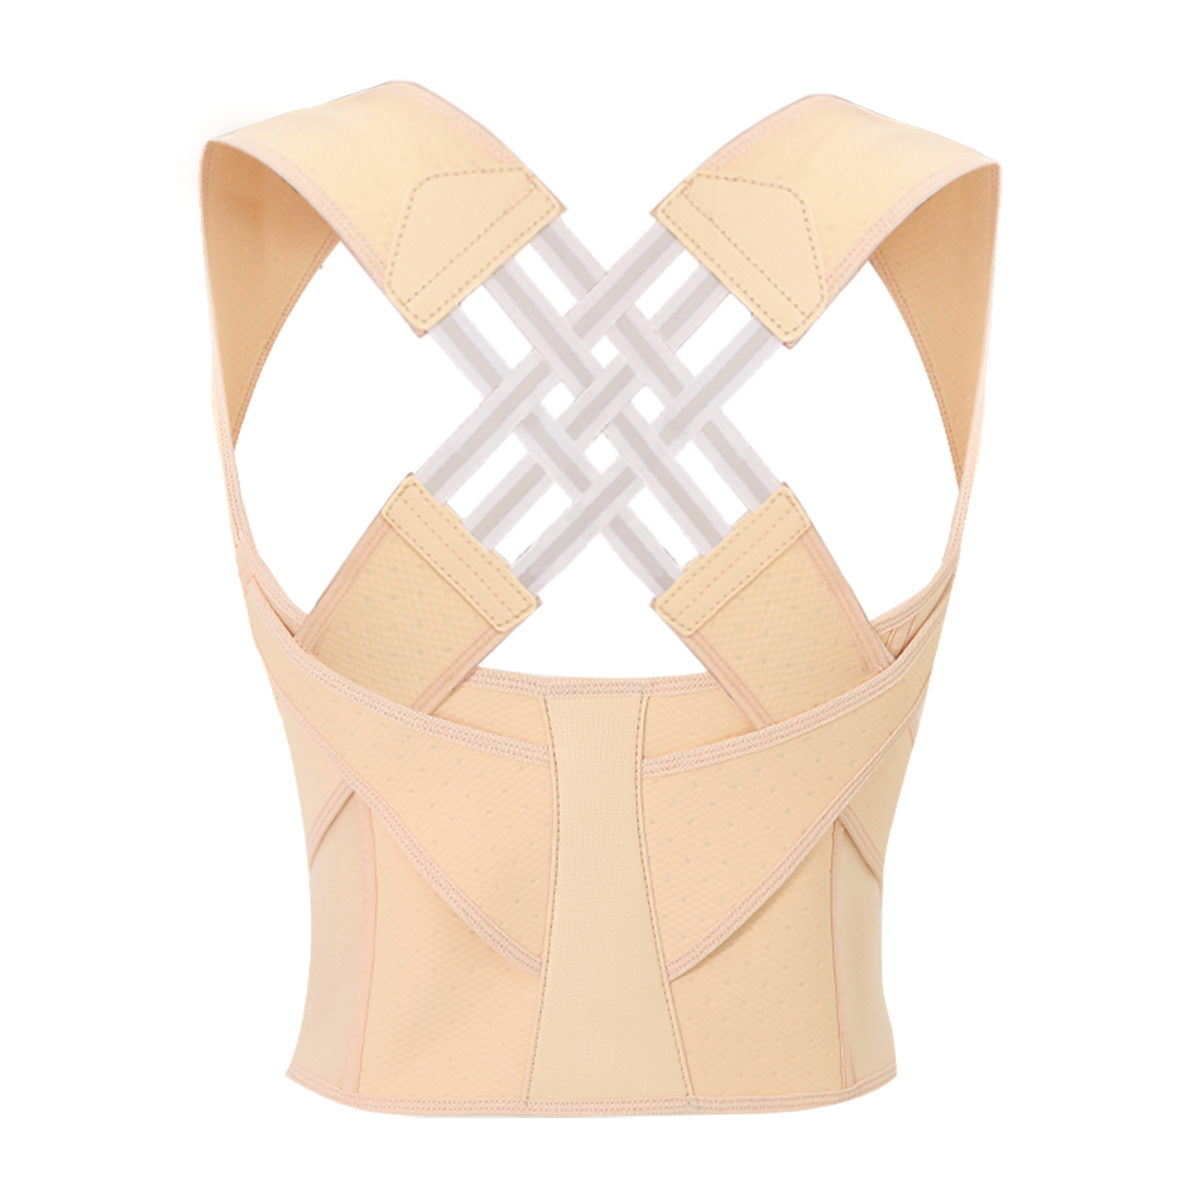 Back Brace and Posture Corrector for Women and Men, Back